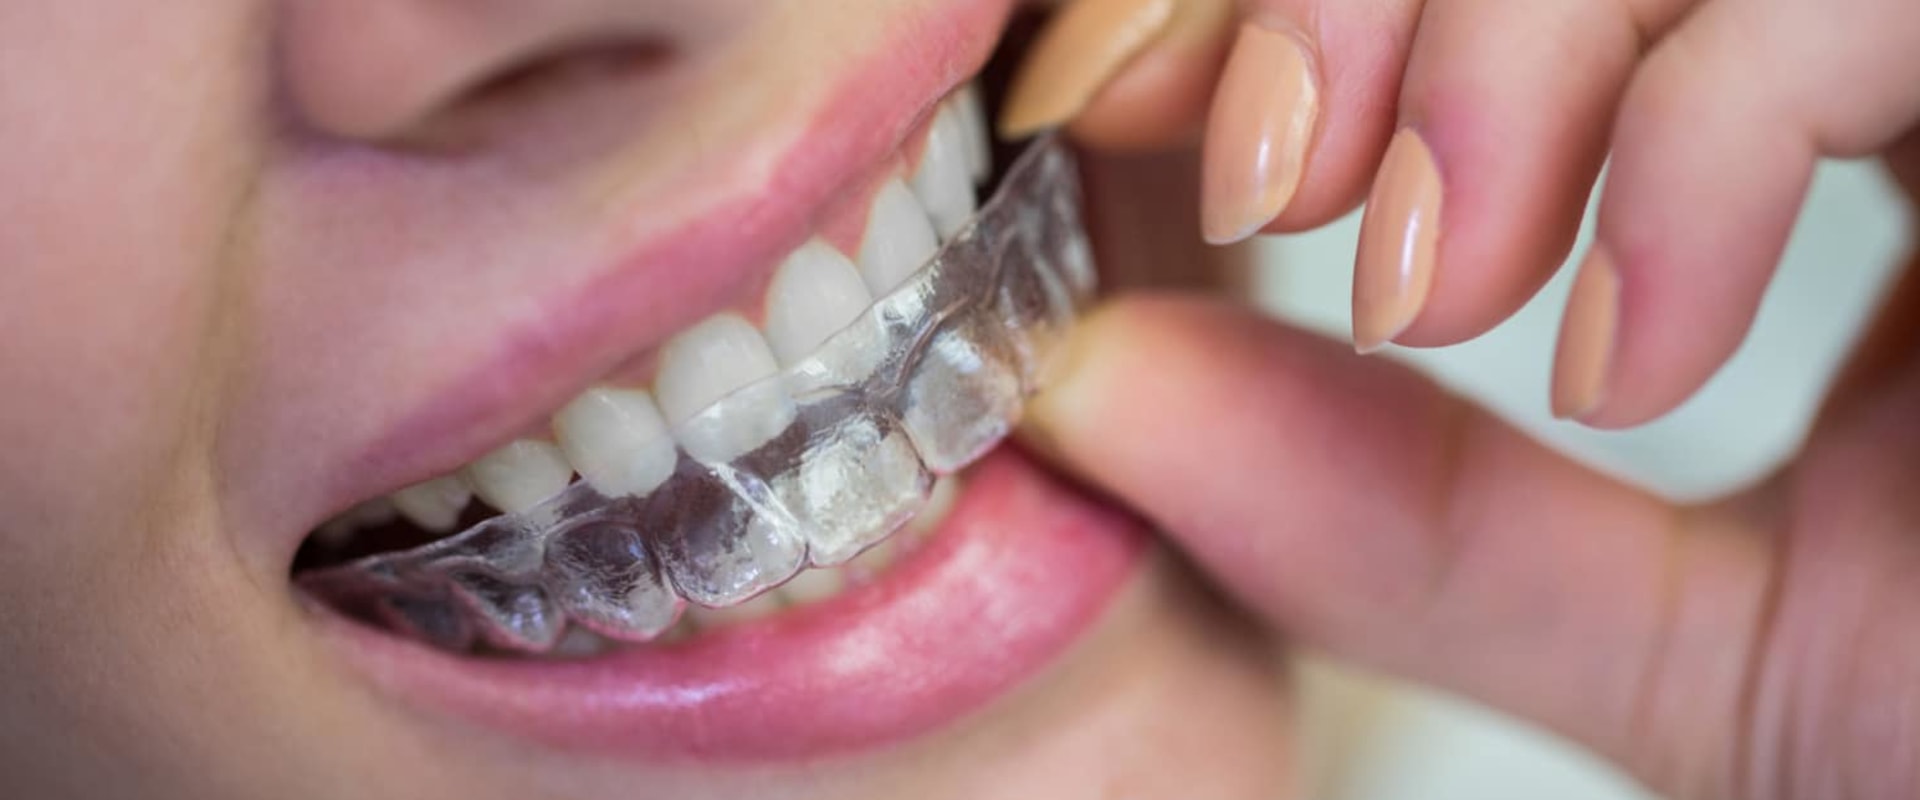 Everything You Need to Know About Dental Savings Plans for Invisalign